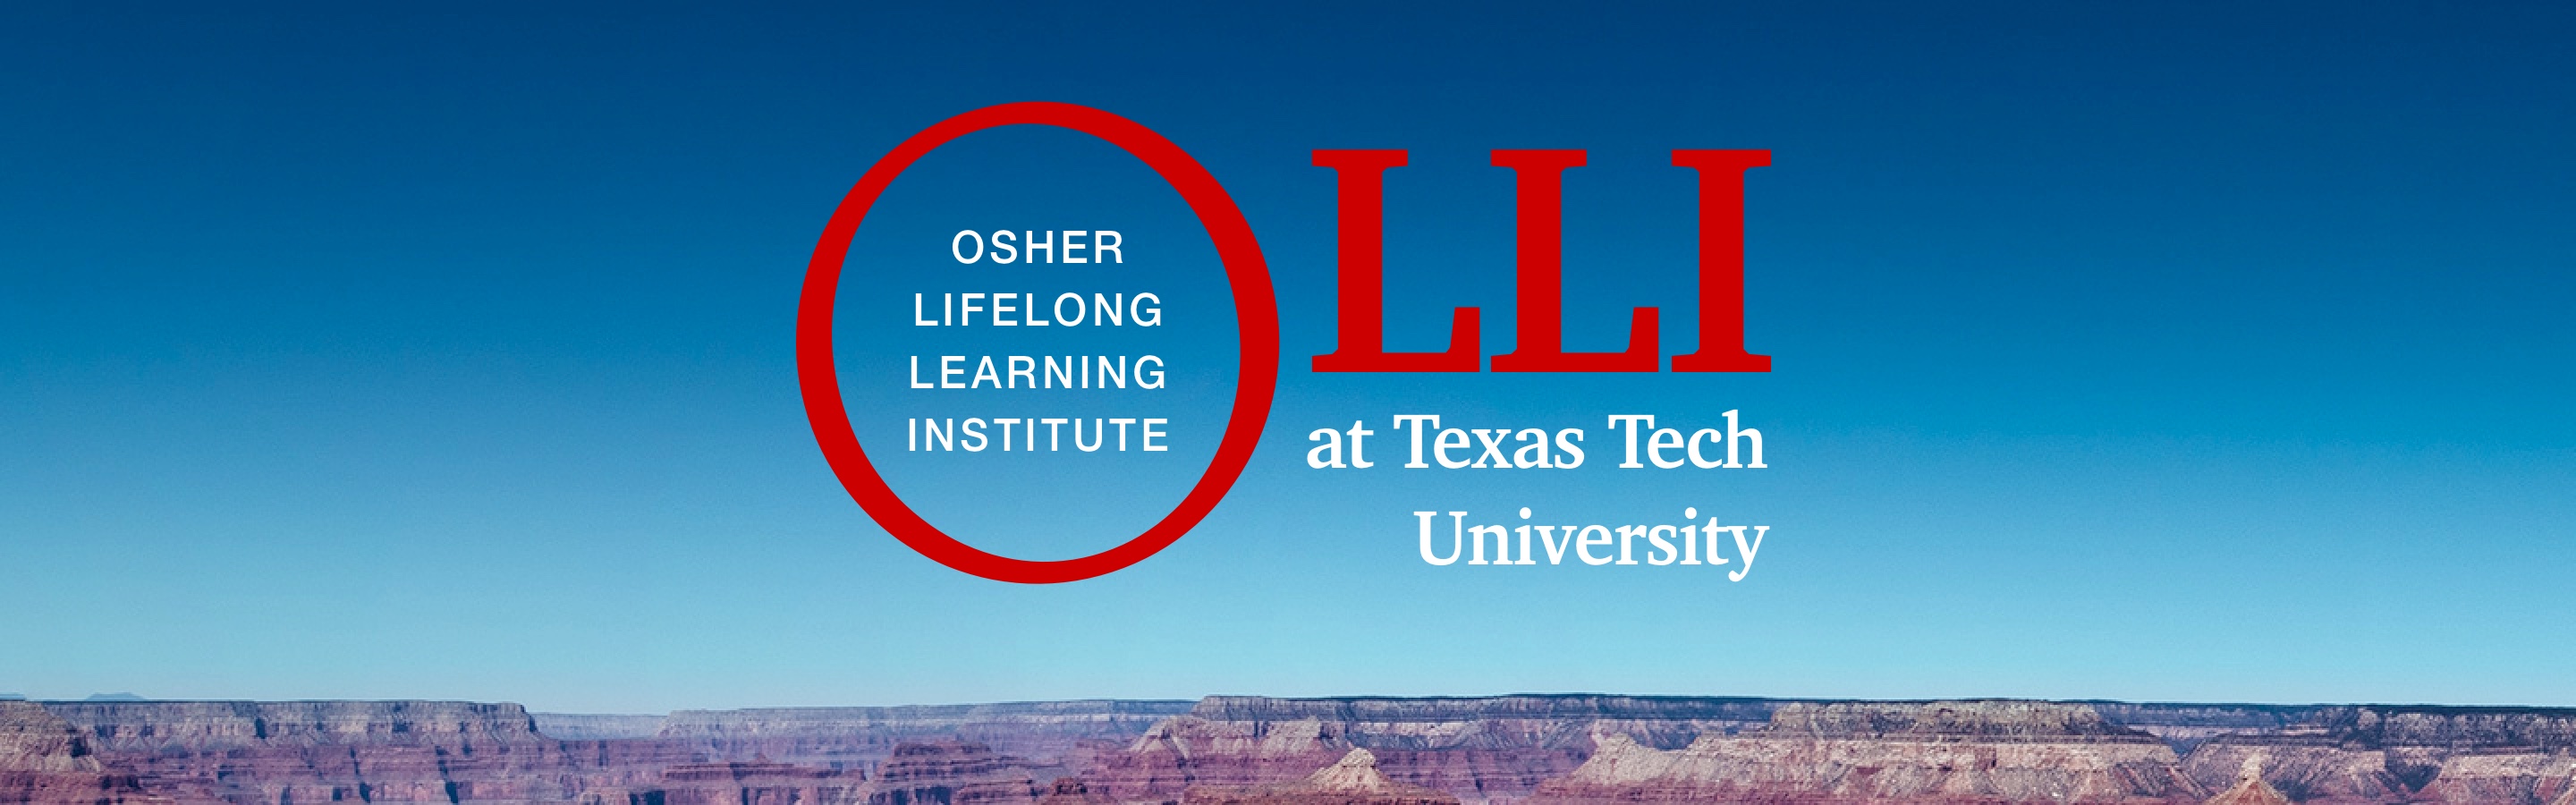 Osher Life Long Learning Institute at Texas Tech University